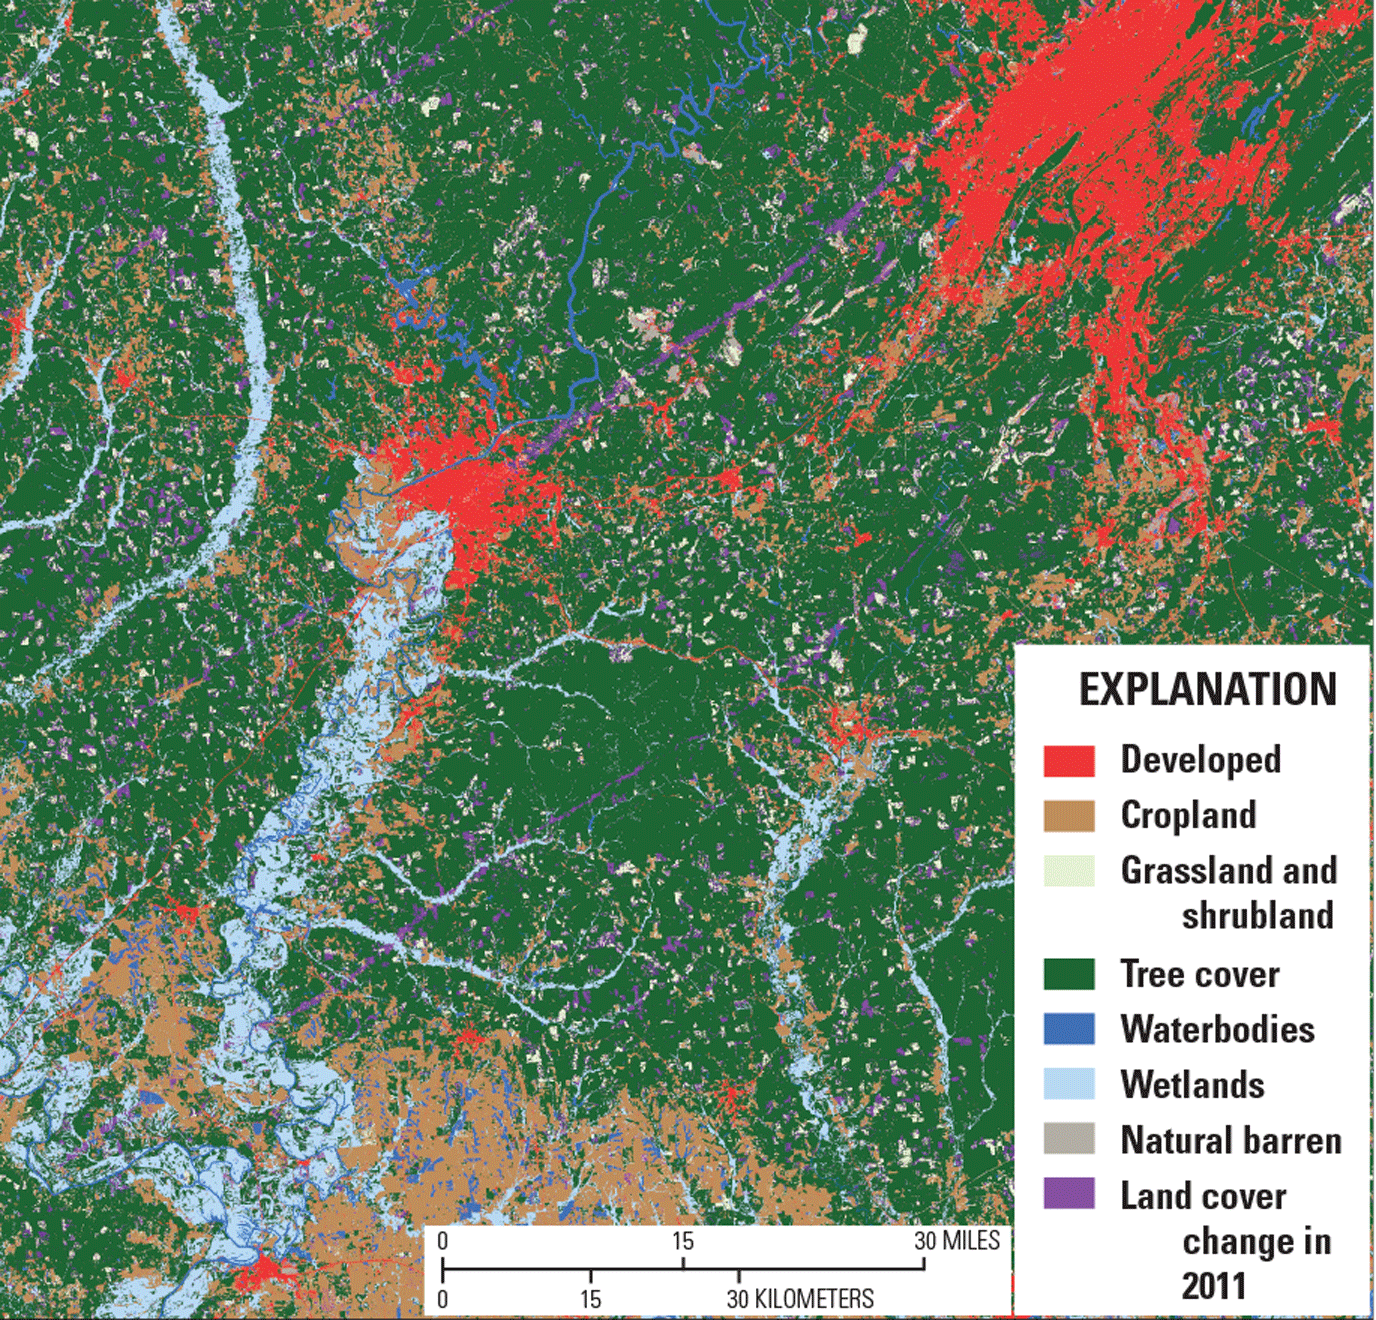 Image showing changes to the landscape caused by tornadoes in Alabama in 2011.